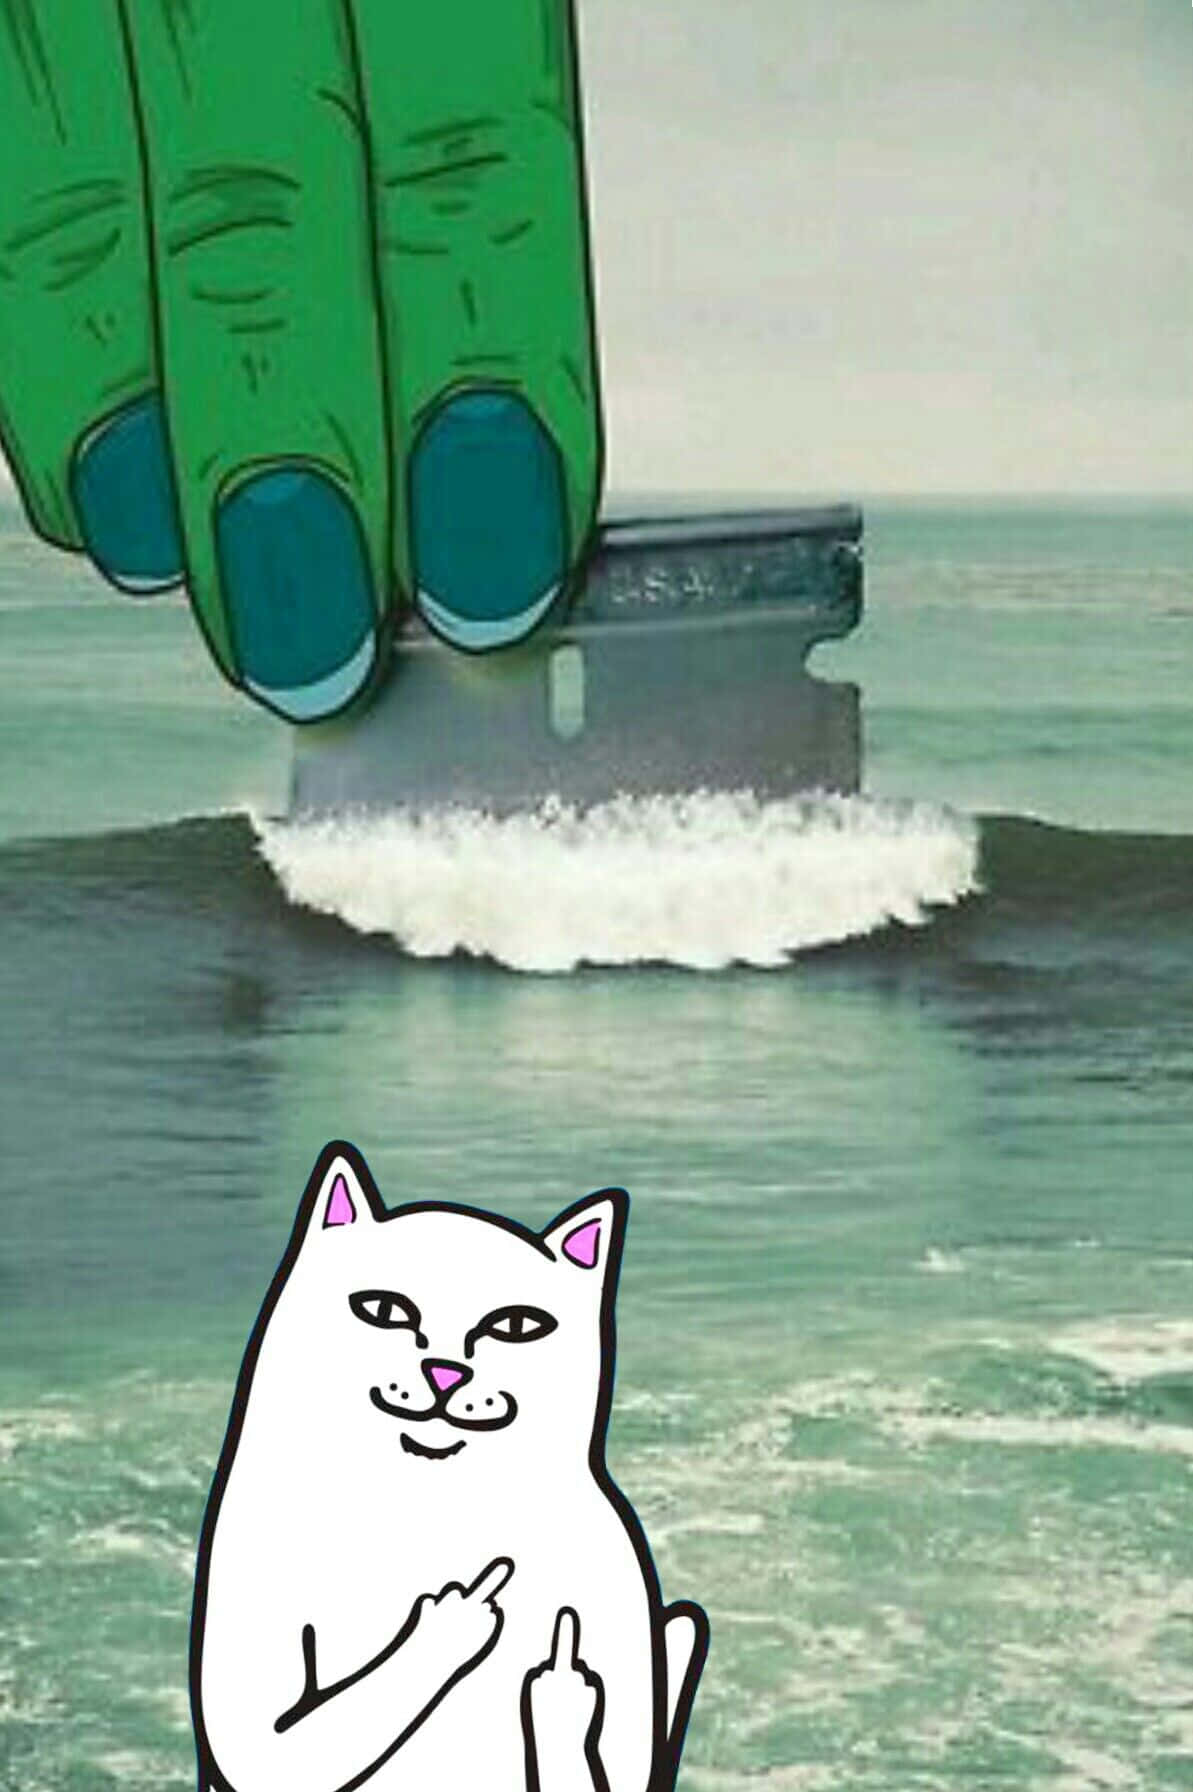 Who Else But Ripndip Is Always Here To Brighten Your Day? Background